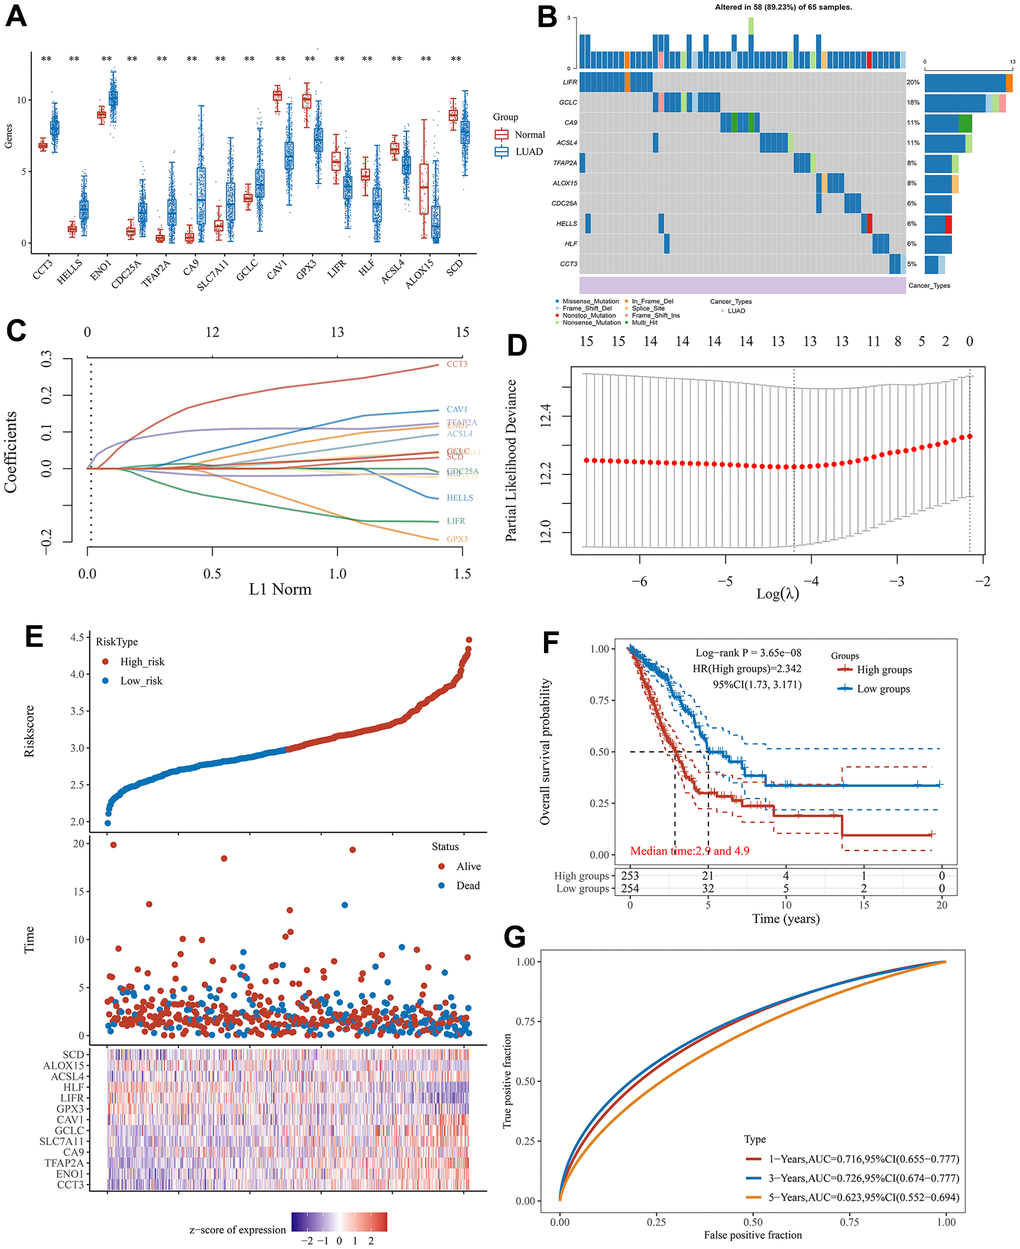 The prognostic signature associated with CRFGs. (A) Differential expression of 15 potentially prognostic CRFGs in LUAD samples and the normal samples. (B) Mutation landscape map of potentially prognostic CRFGs, showing SNV and genomic mutation types. (C, D) Prognostic signature established by LASSO Cox regression analysis. (E) Risk score distribution, patient survival status and CRFGs expression profile calculated by the prognostic signature. (F) Survival curves of LUAD patients in low- and high-risk groups. (G) ROC curves of the prognostic signature at 1, 3, and 5 years. *P 